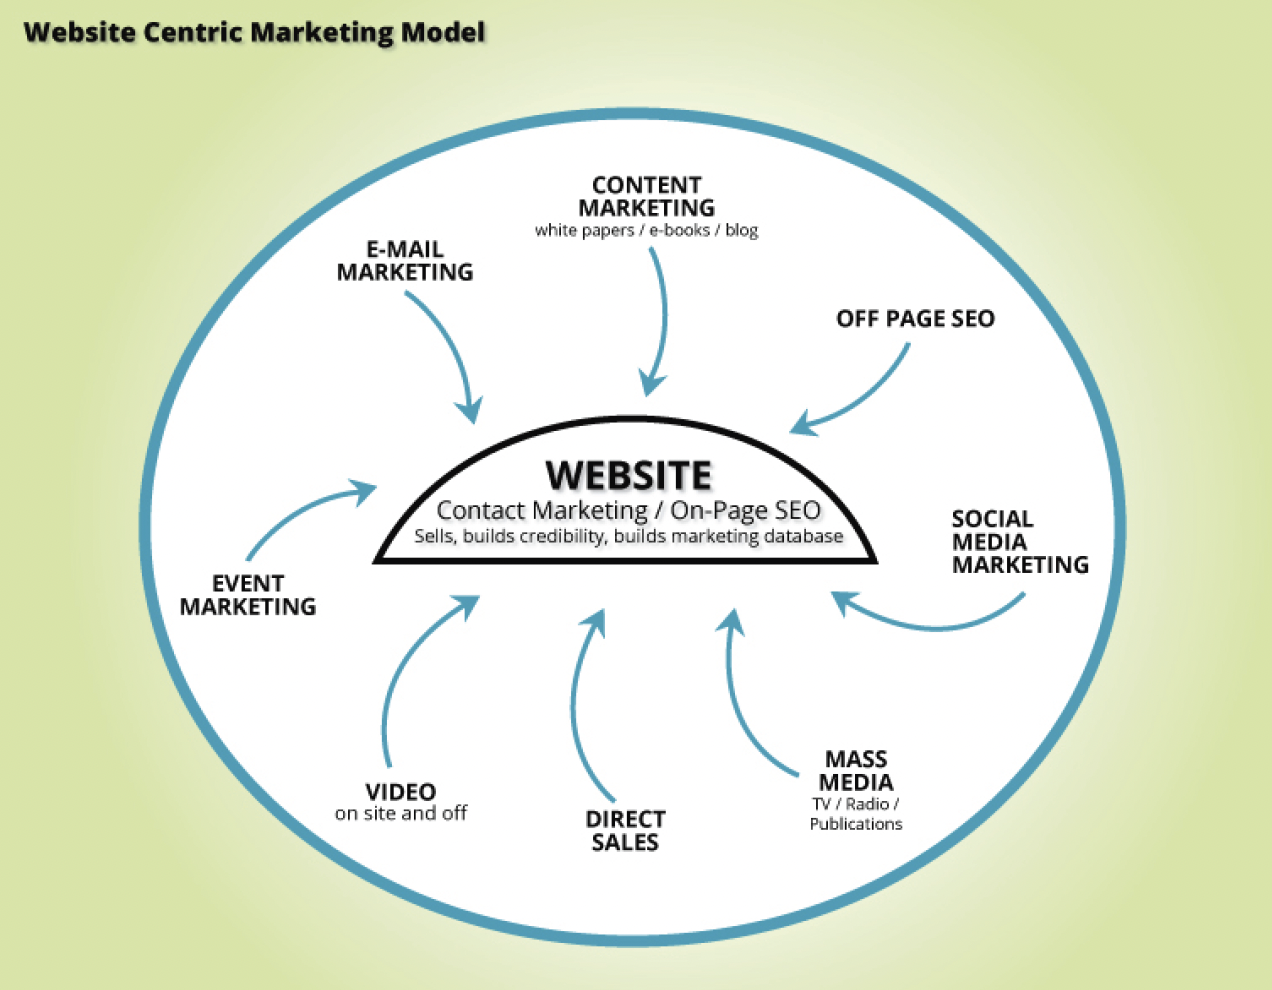 Website Centric Manufacturing Marketing Model